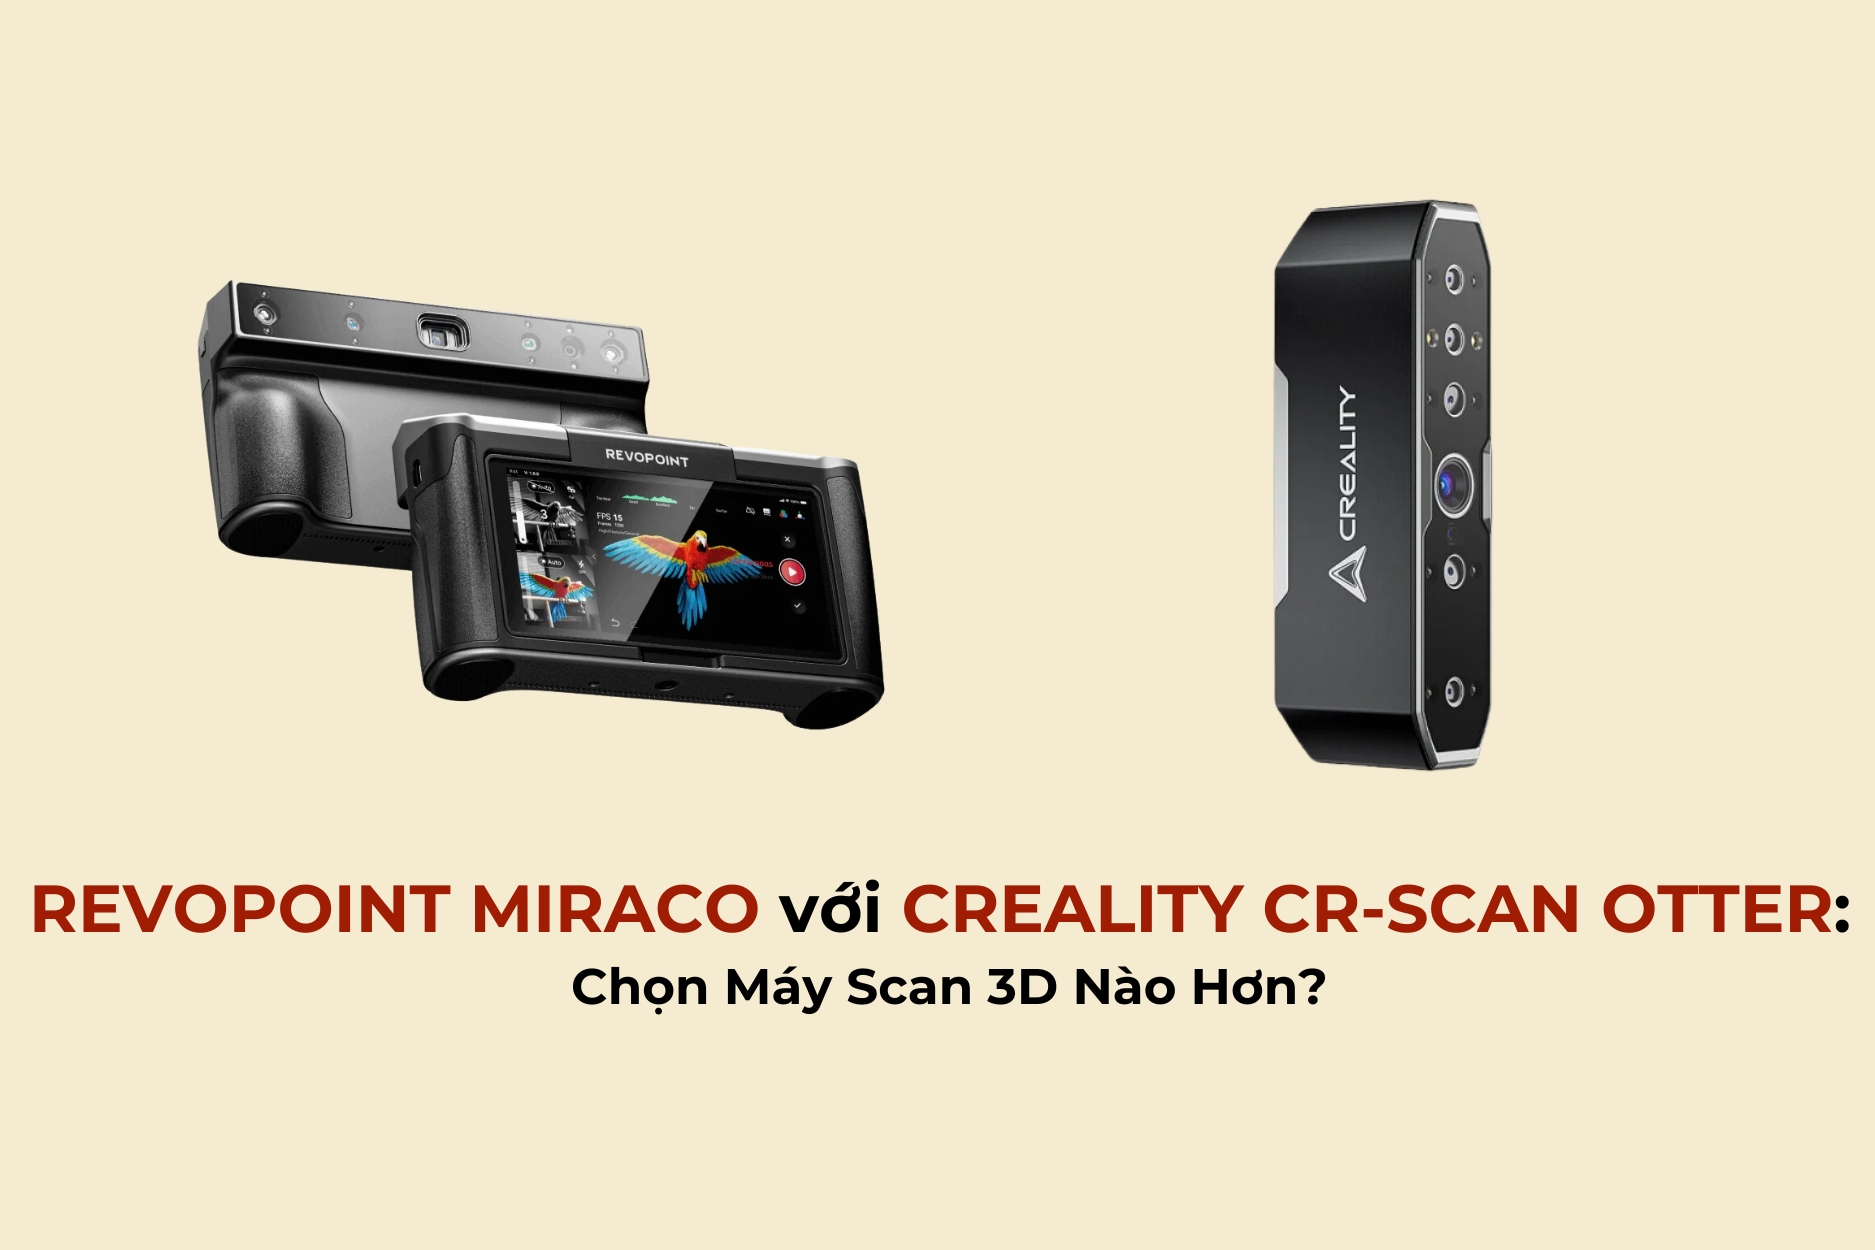 REVOPOINT MIRACO vs. CREALITY CR-SCAN OTTER: Which 3D Scanner to Choose?